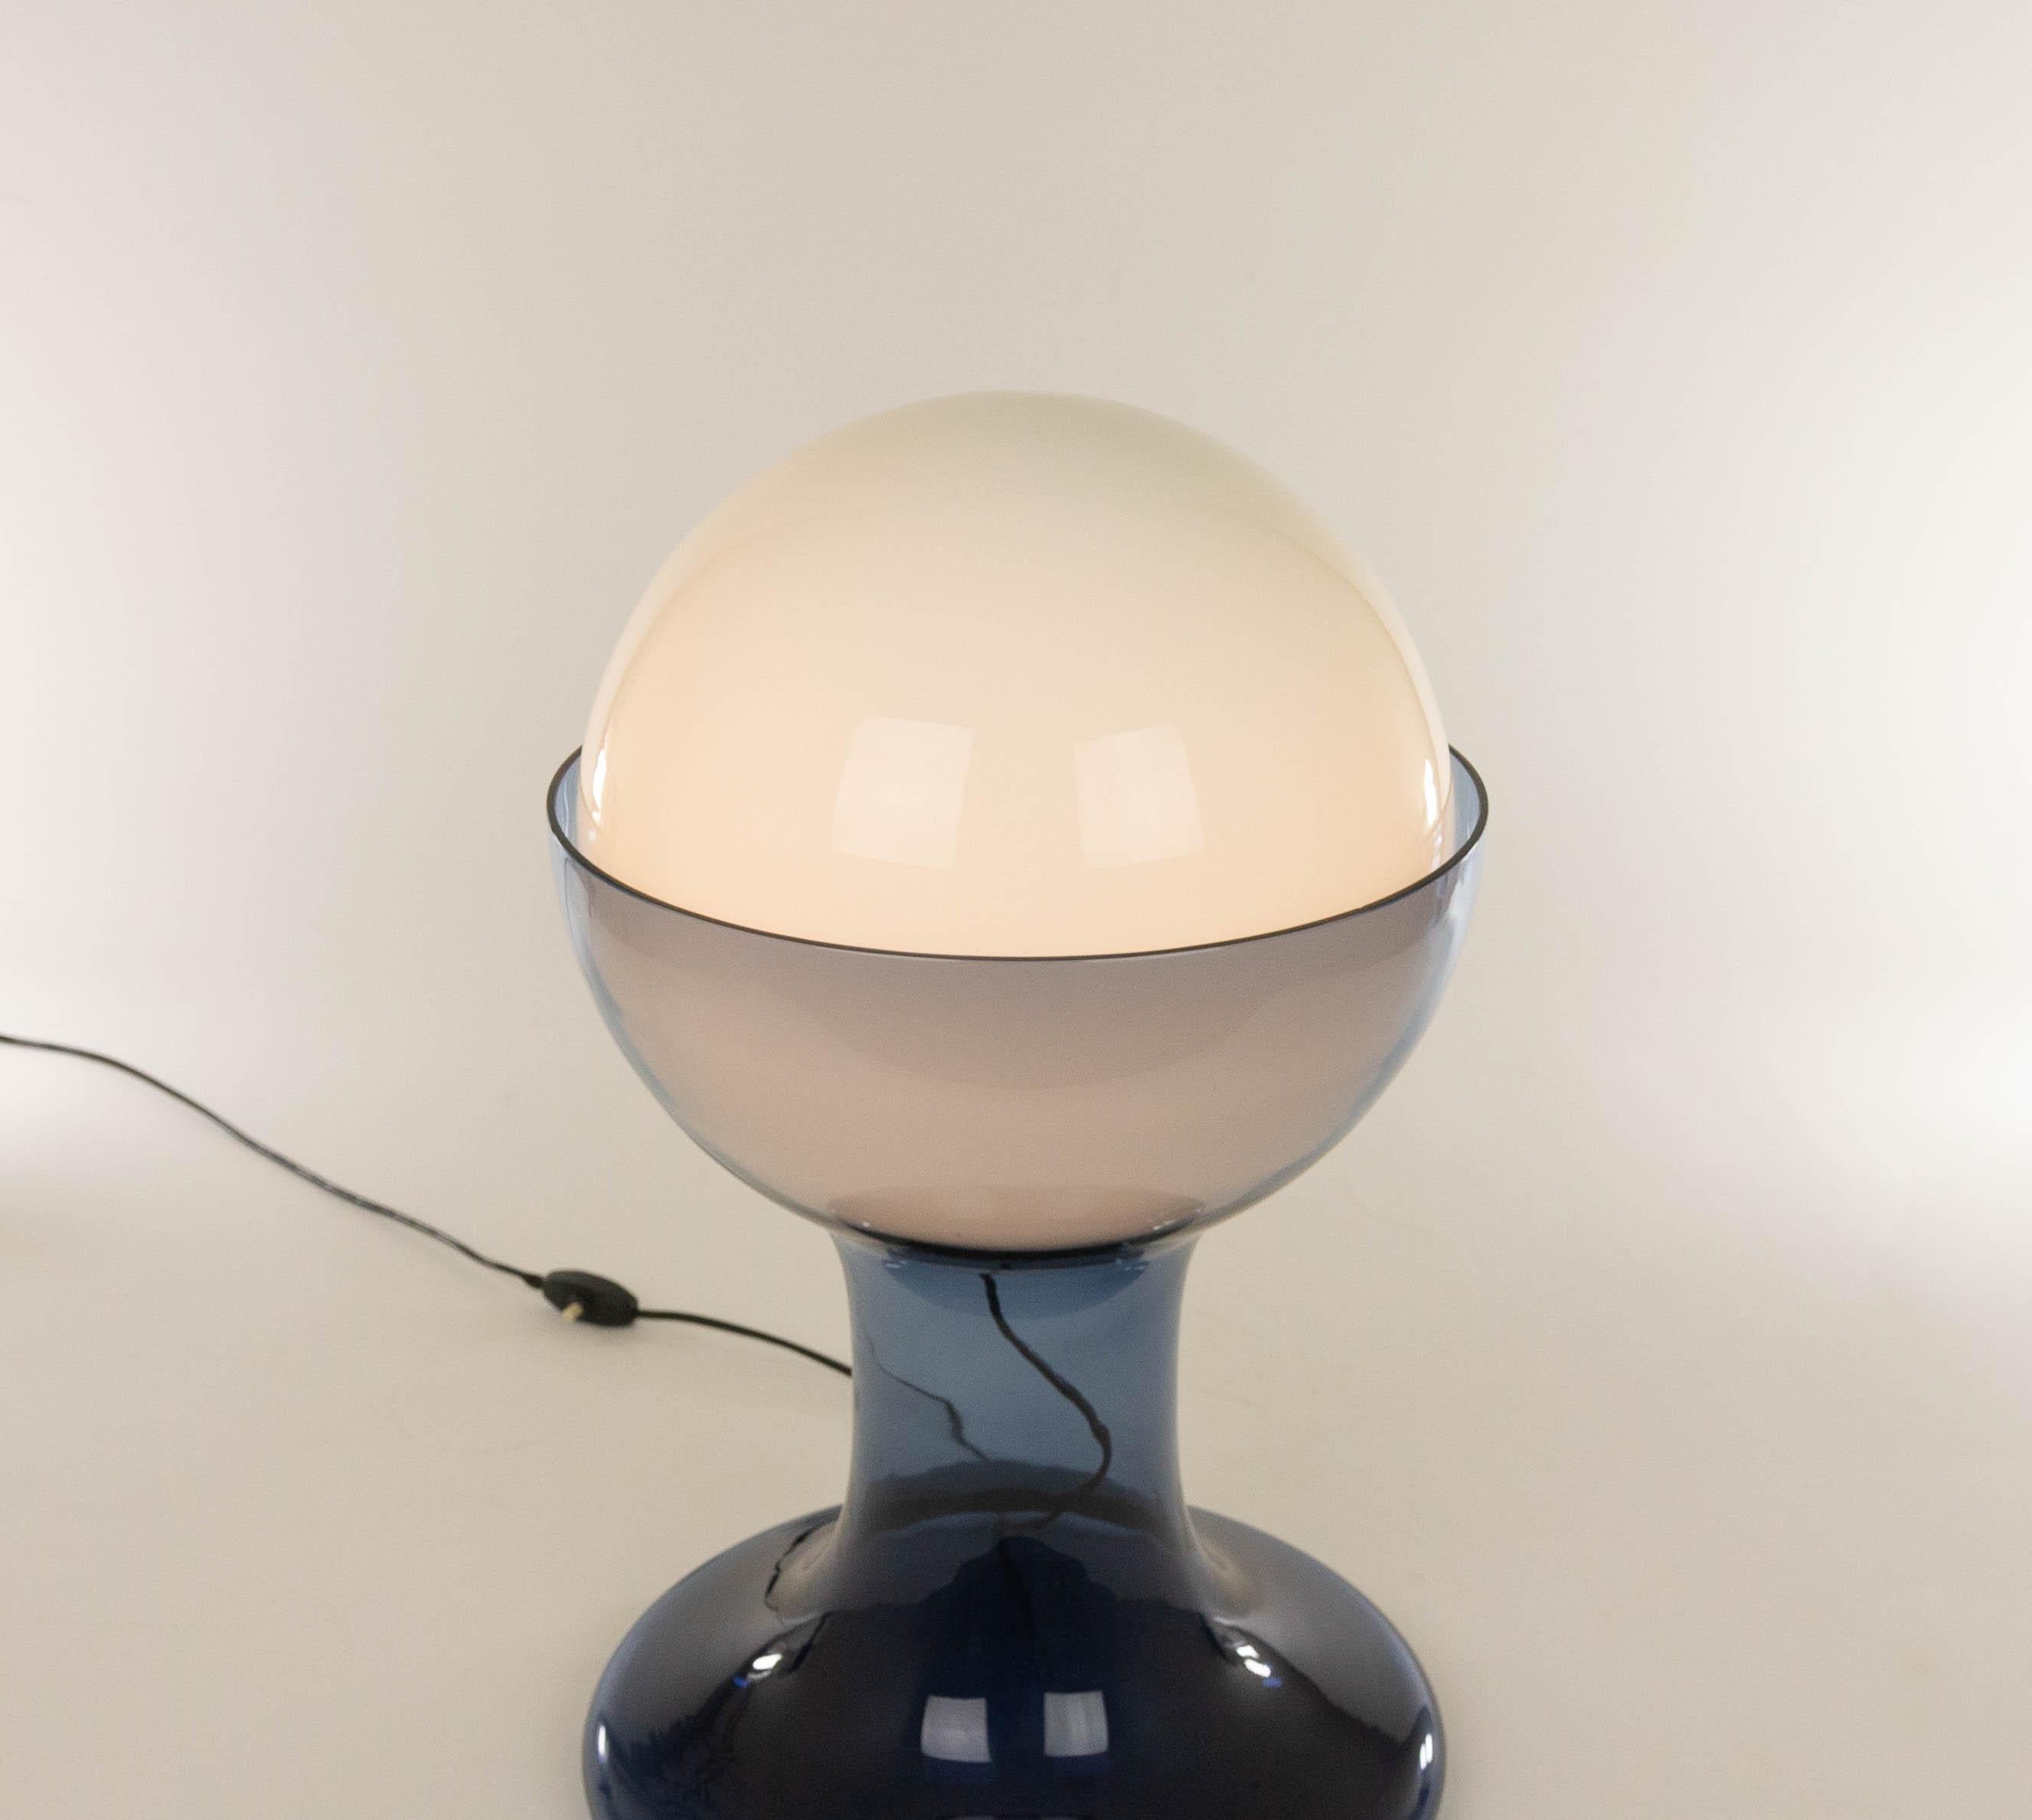 Mid-Century Modern Large Blue LT 216 Table Lamp by Carlo Nason for A.V. Mazzega, 1960s For Sale